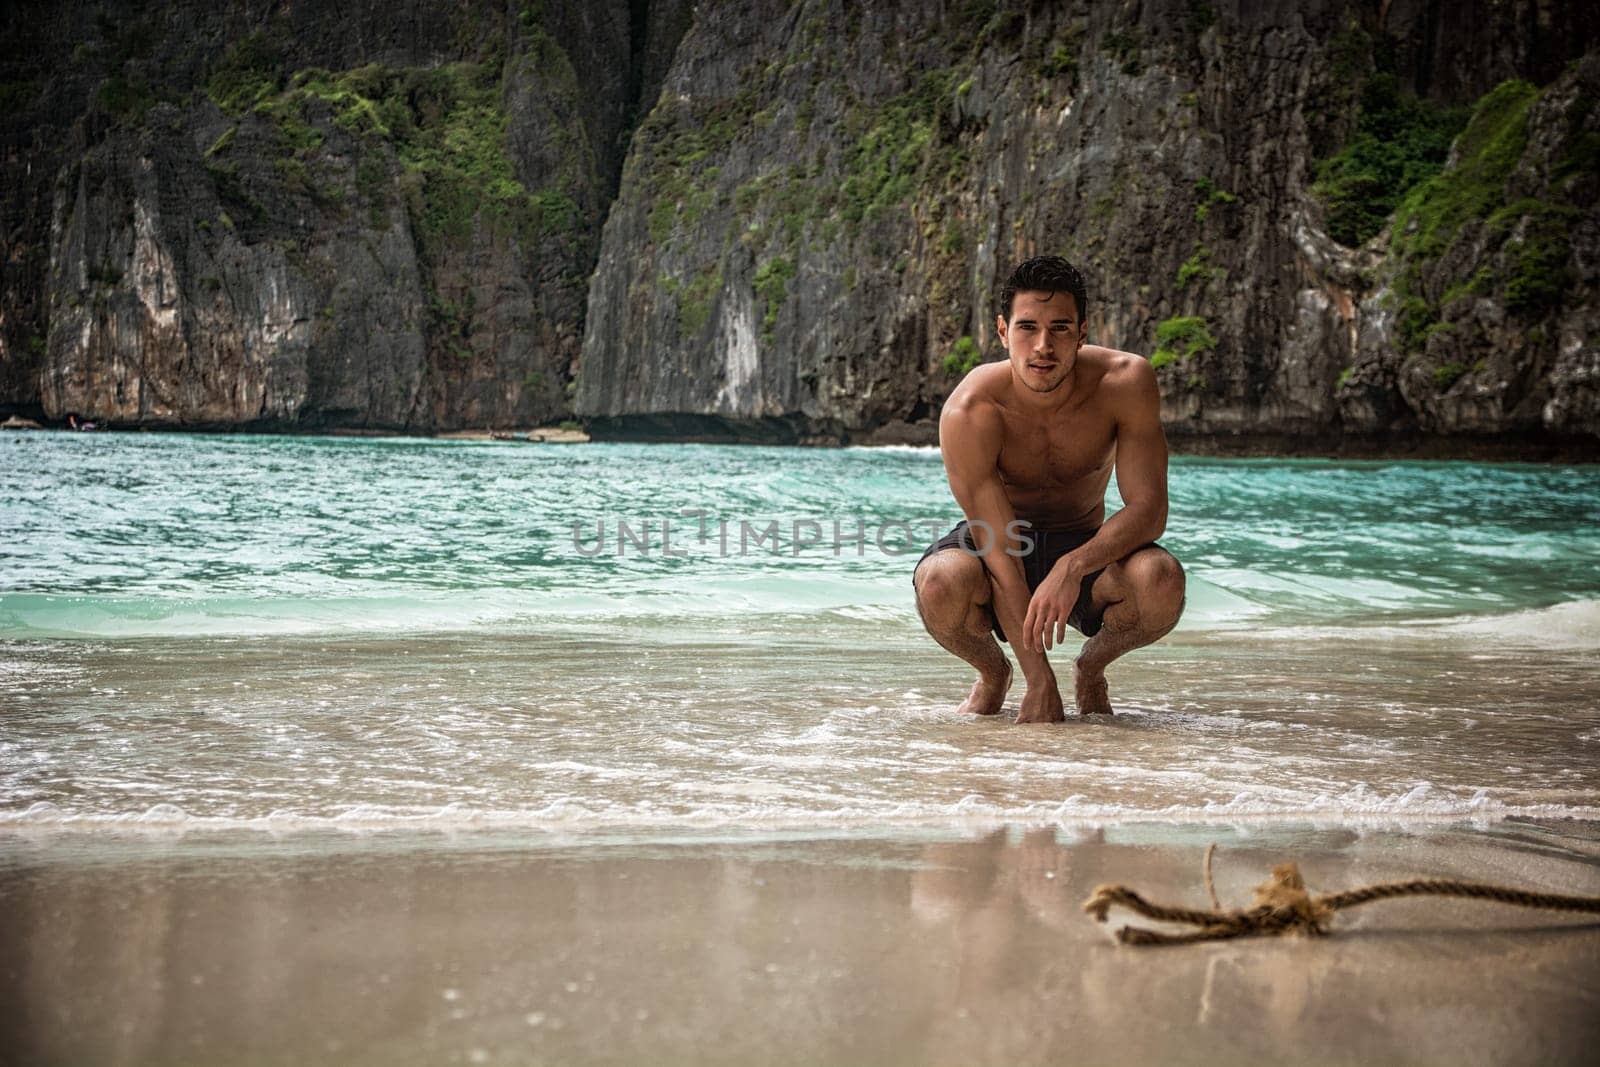 Attractive young man crouching on a beach in Phuket Island, Thailand, shirtless wearing boxer shorts, showing muscular fit body, looking at camera